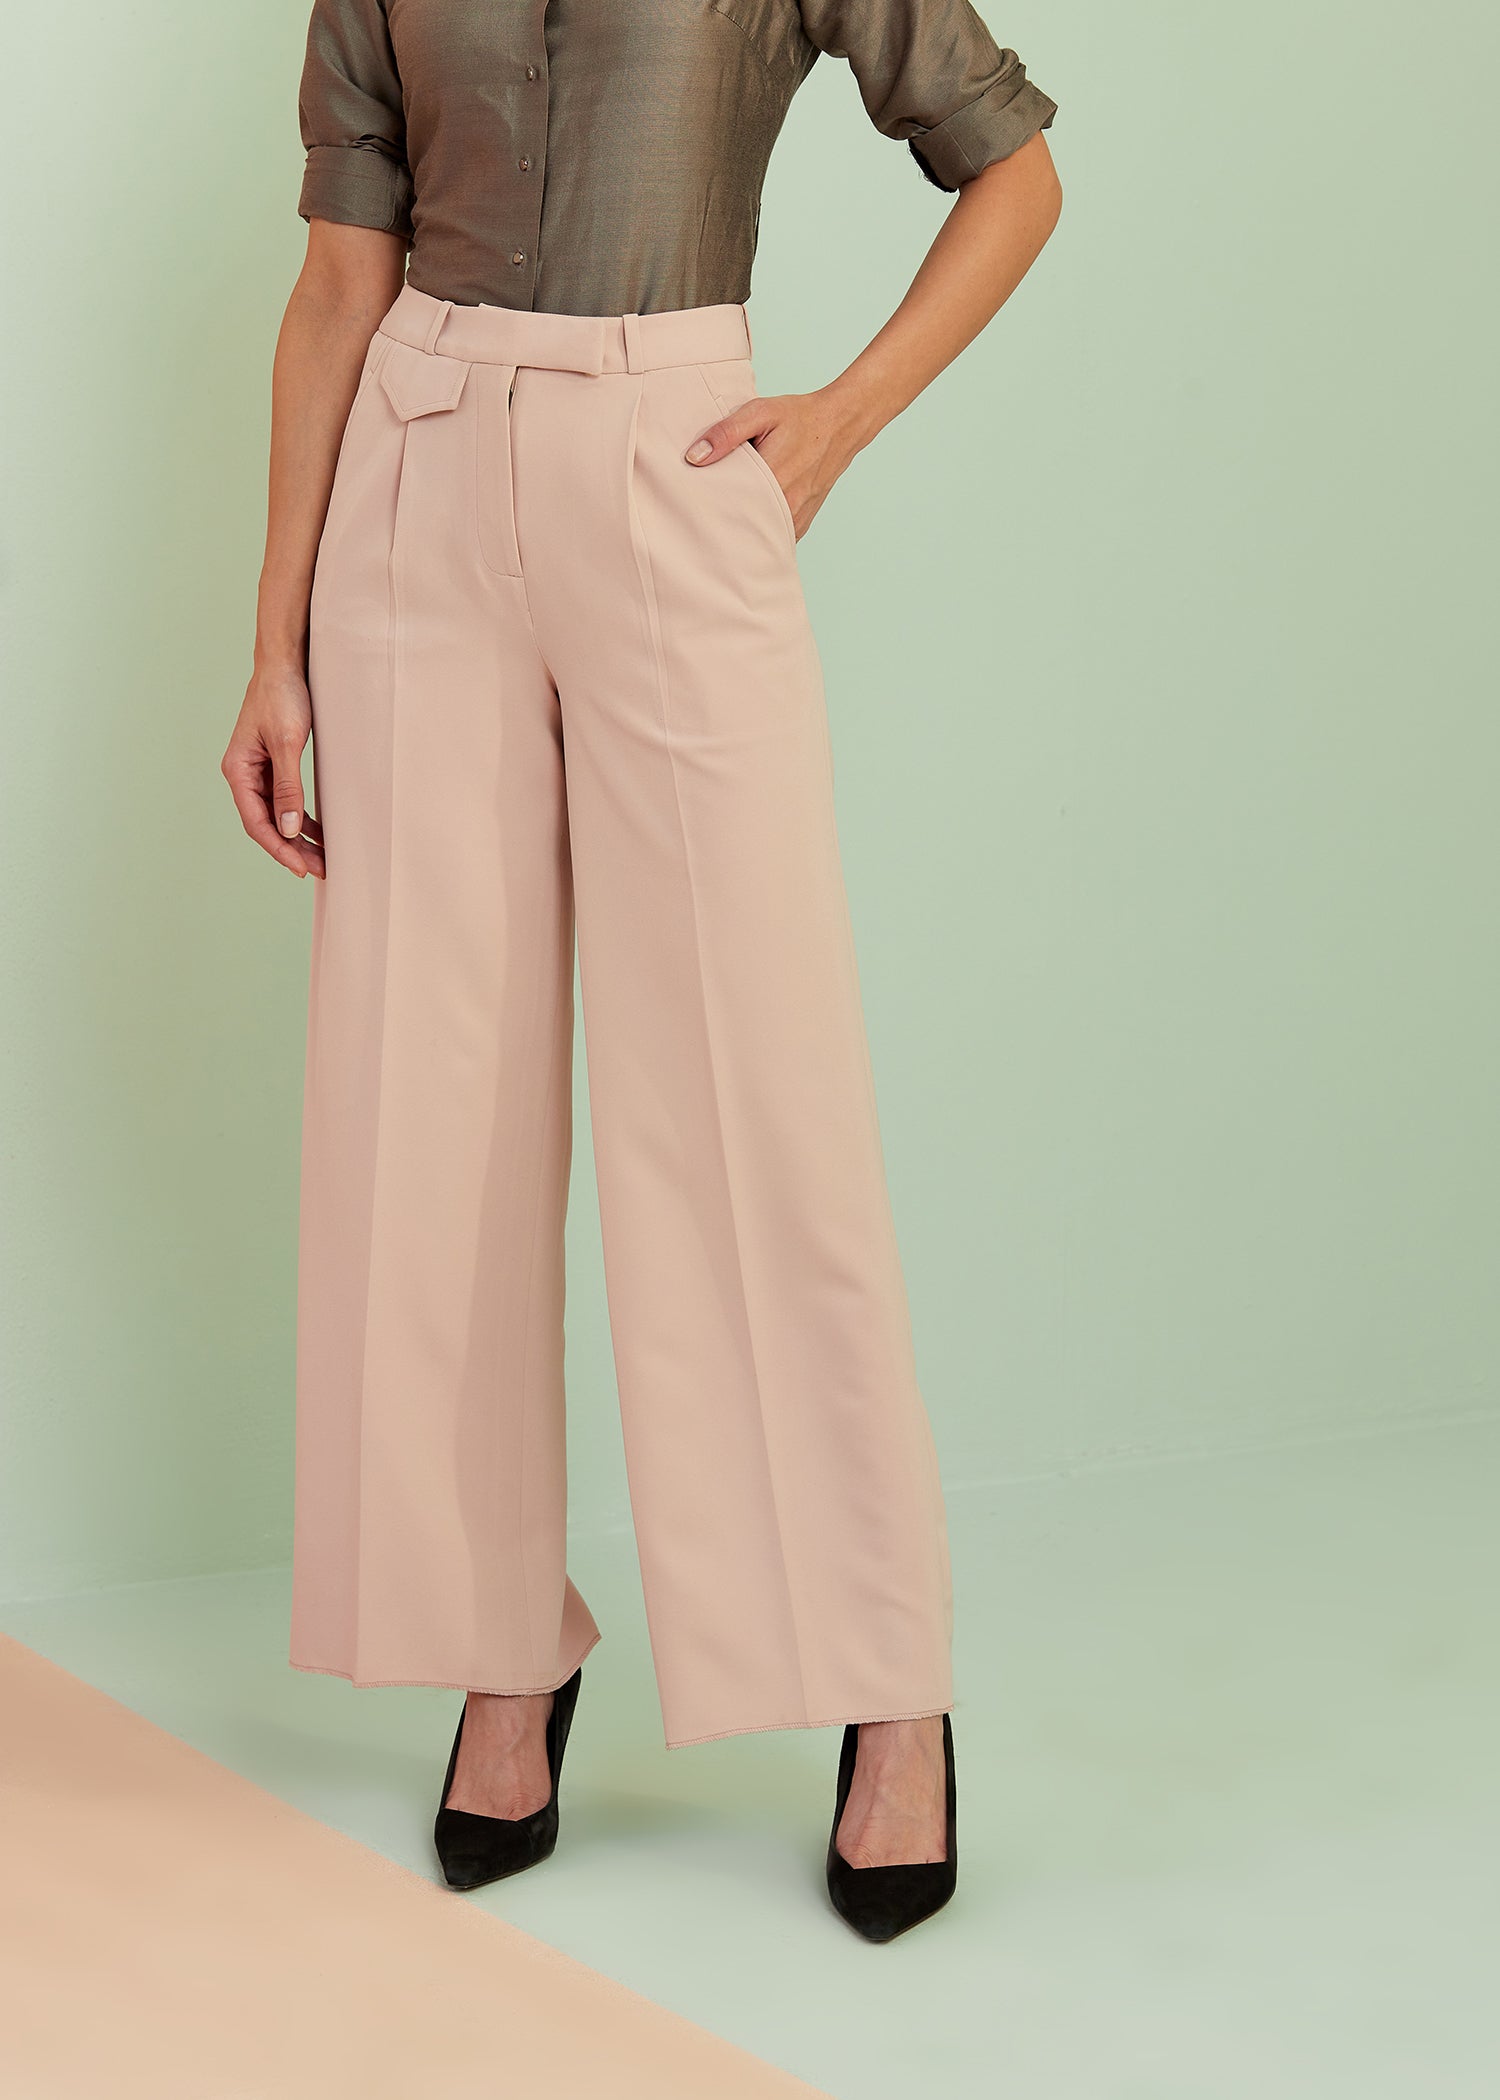 Dusty Pink Flared Pants